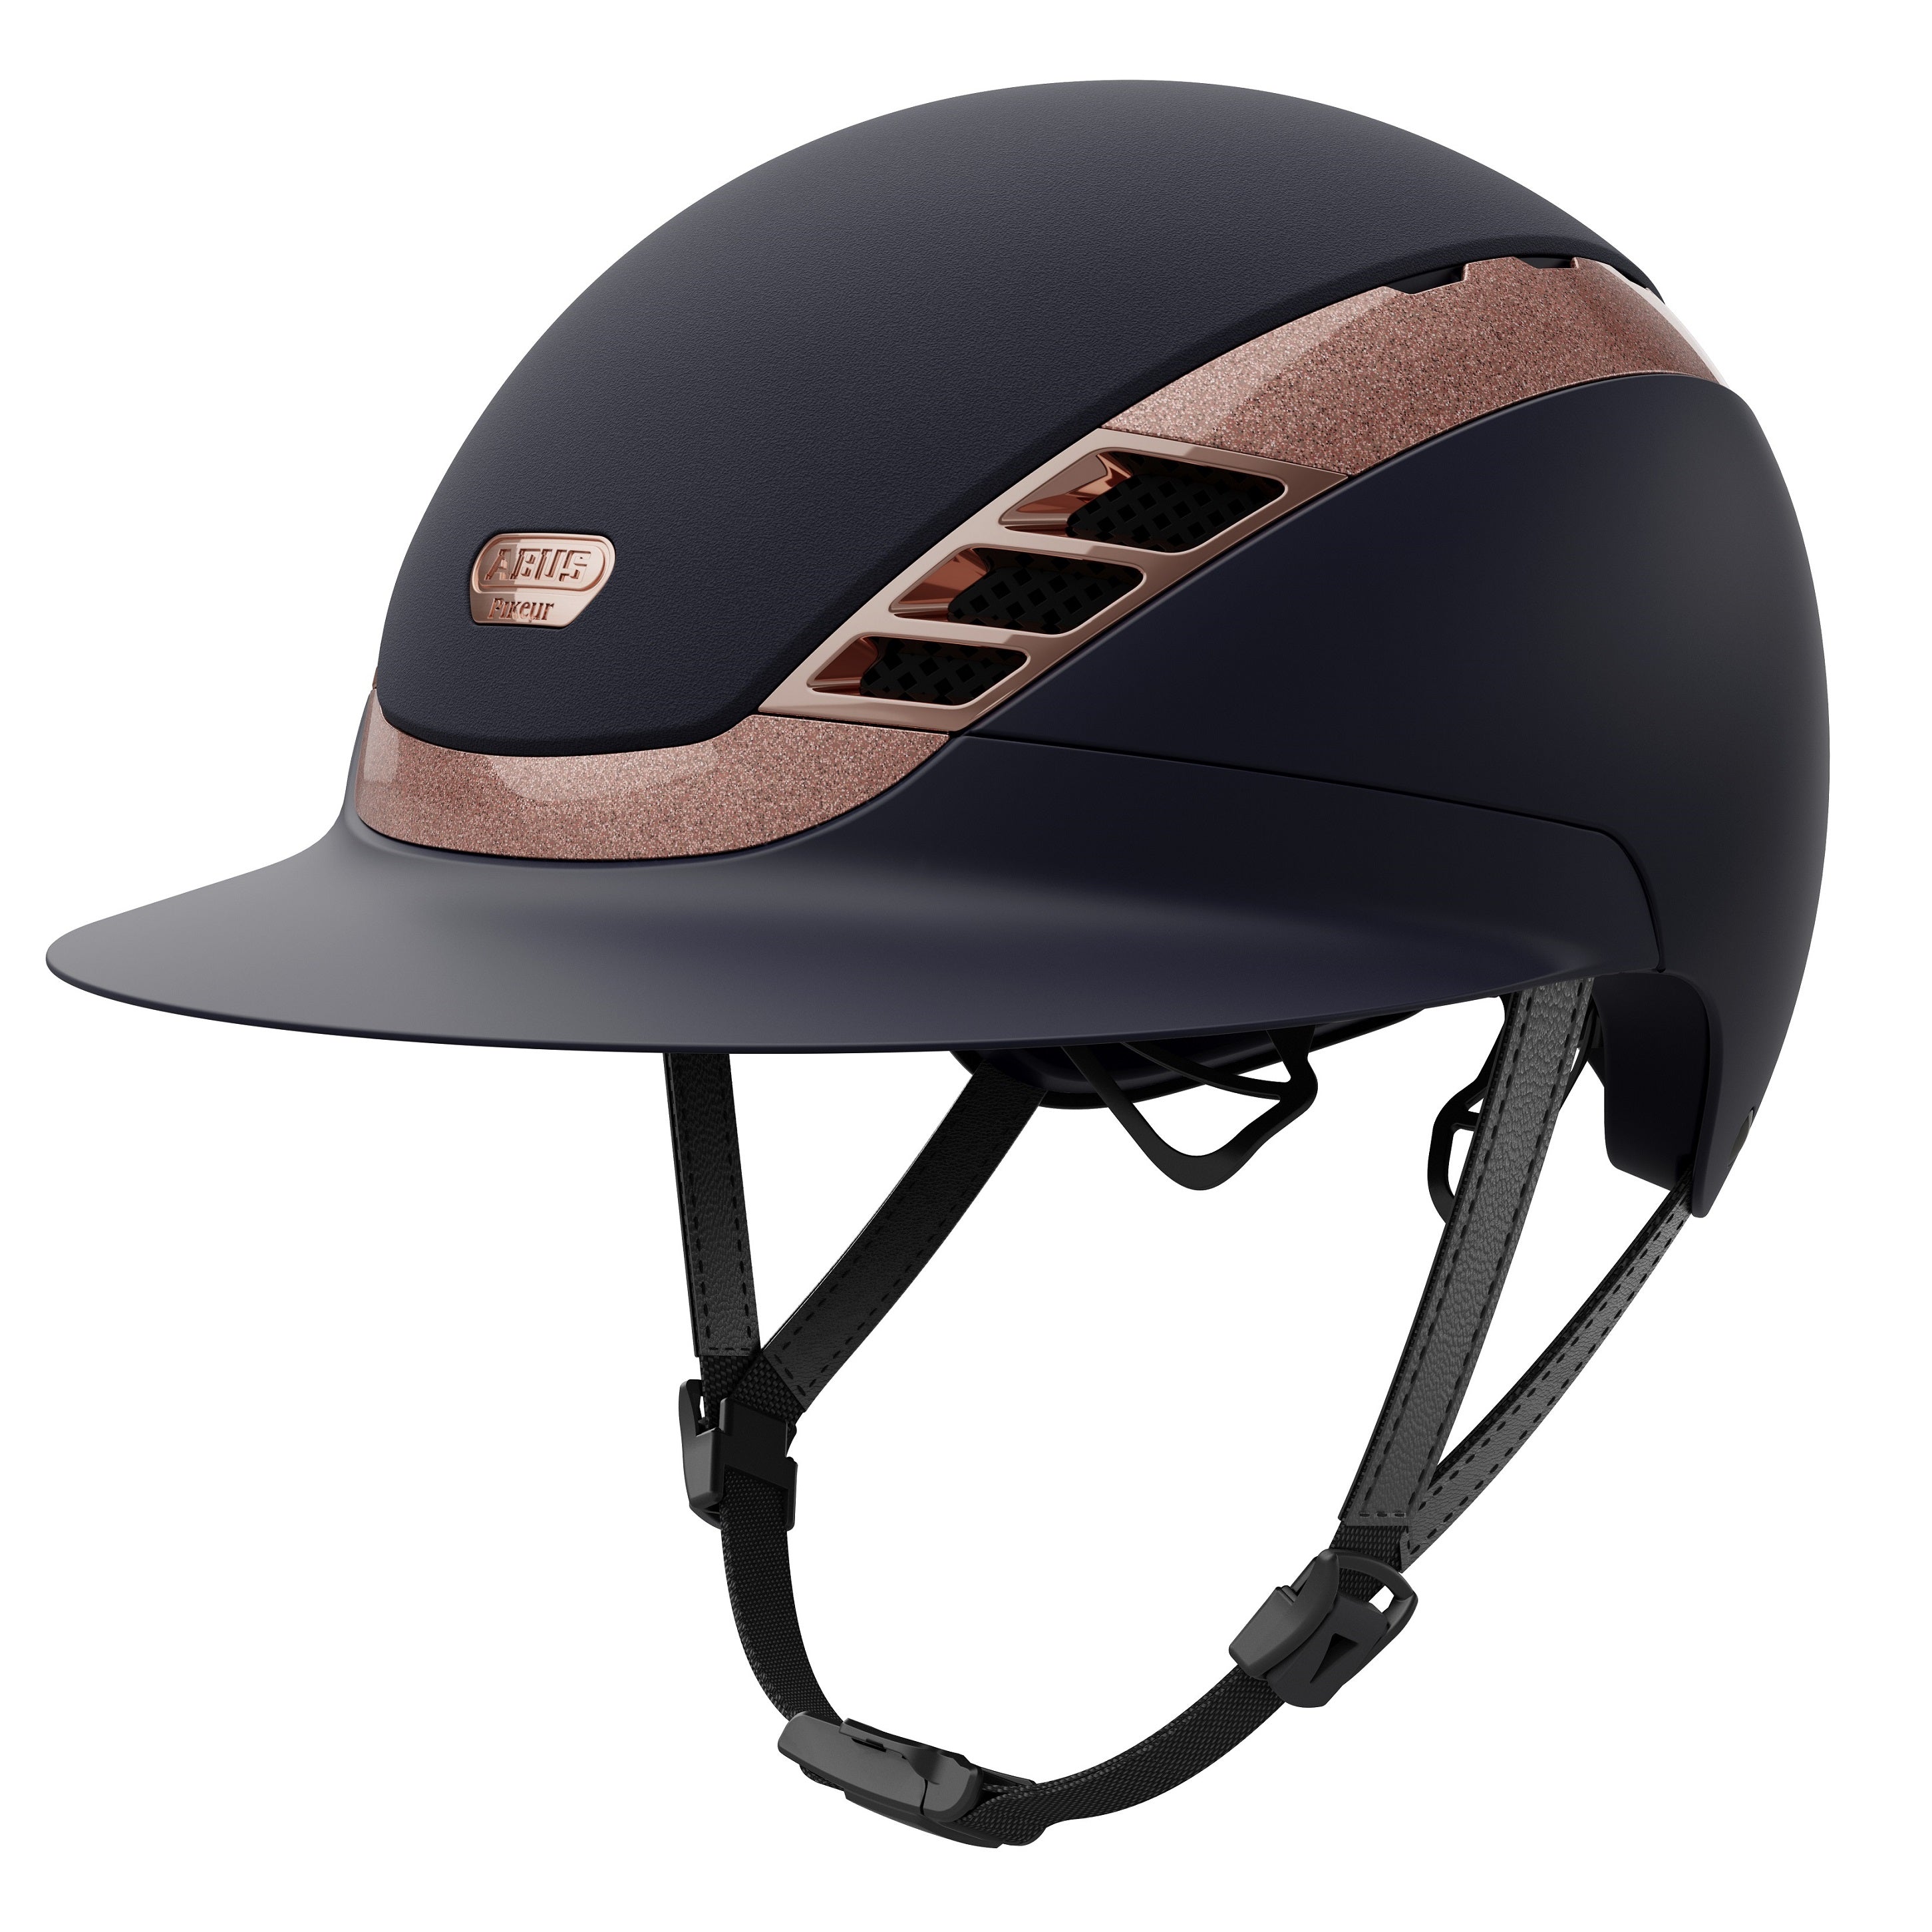 Abus AirLuxe Supreme Riding Helmet LV - due October